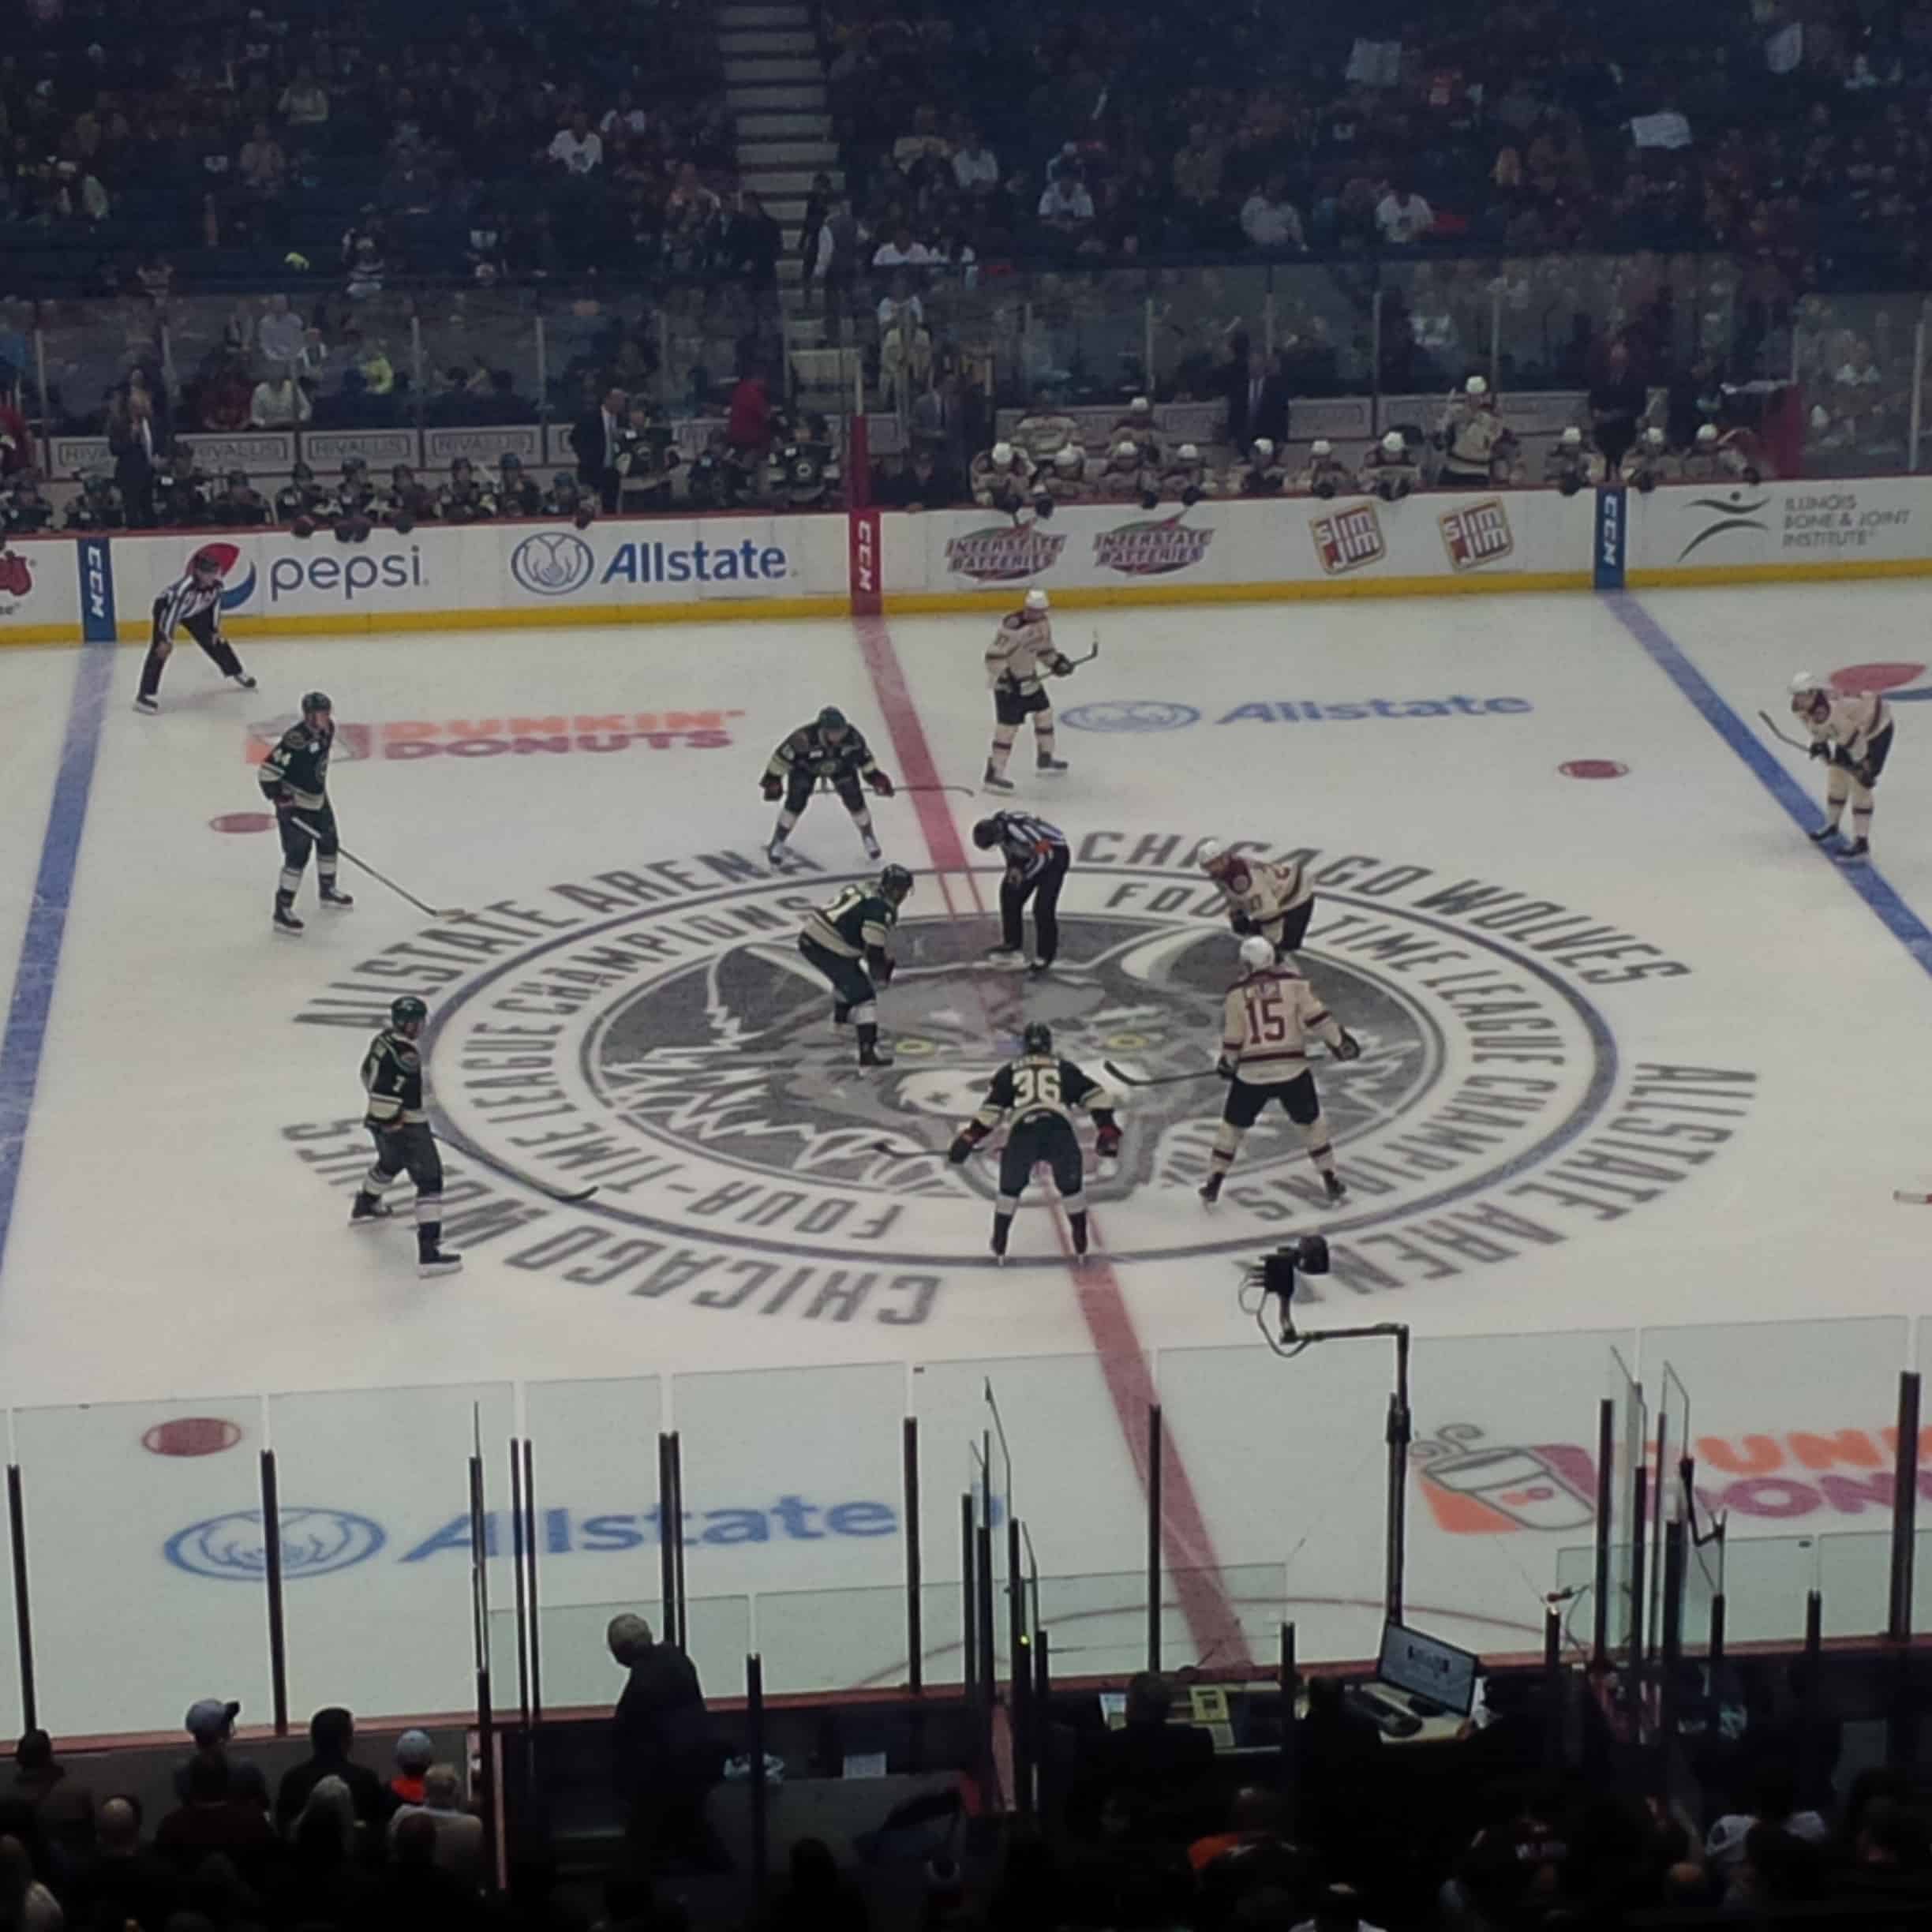 The Wolves (white jerseys) opening face-off against Iowa.